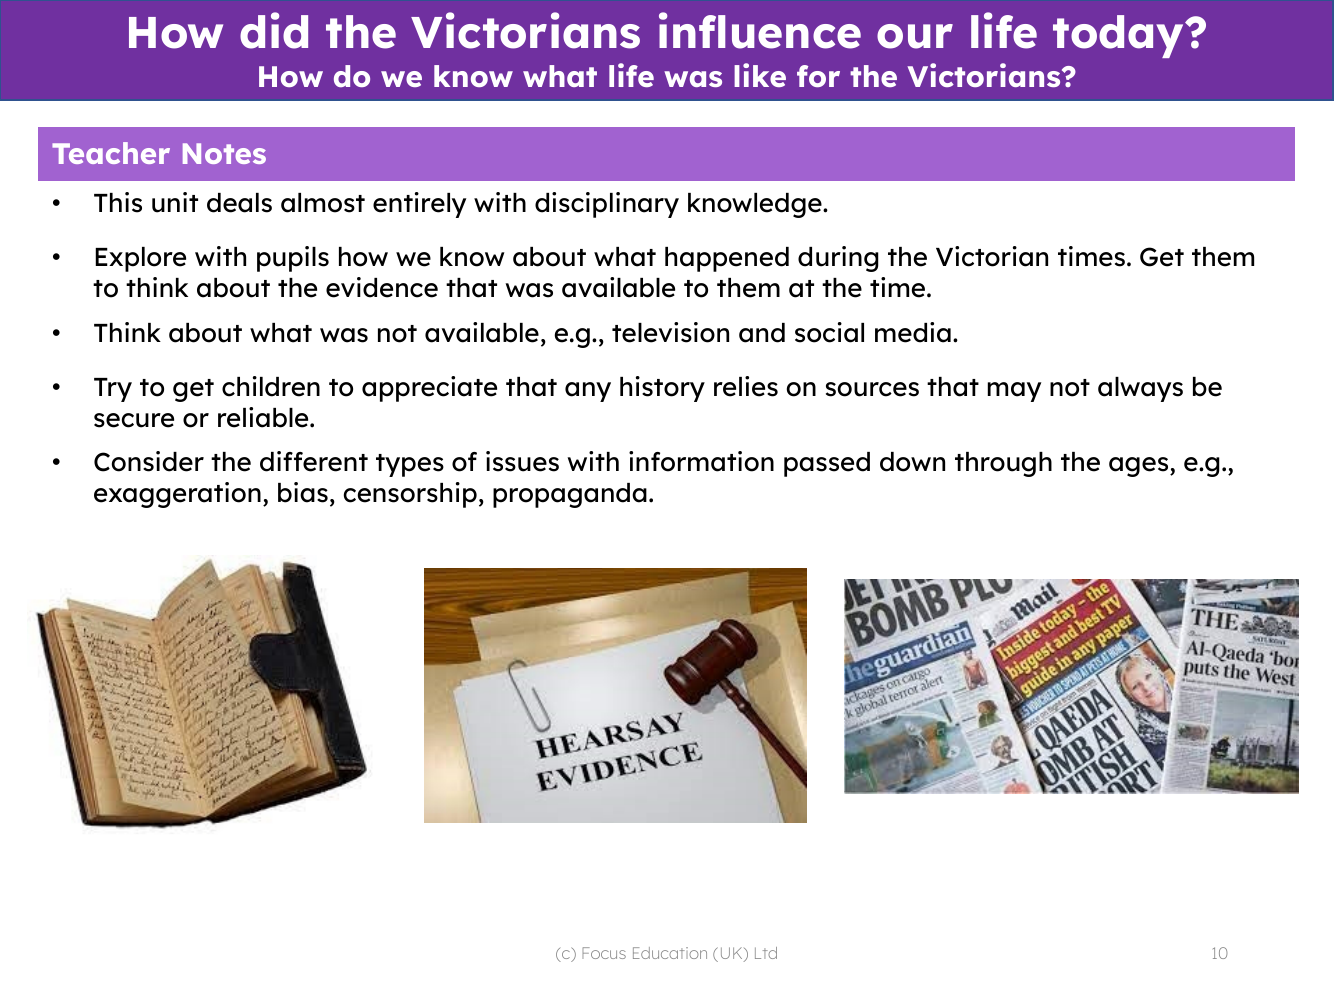 How do we know what life was like for the Victorians? - Teacher notes